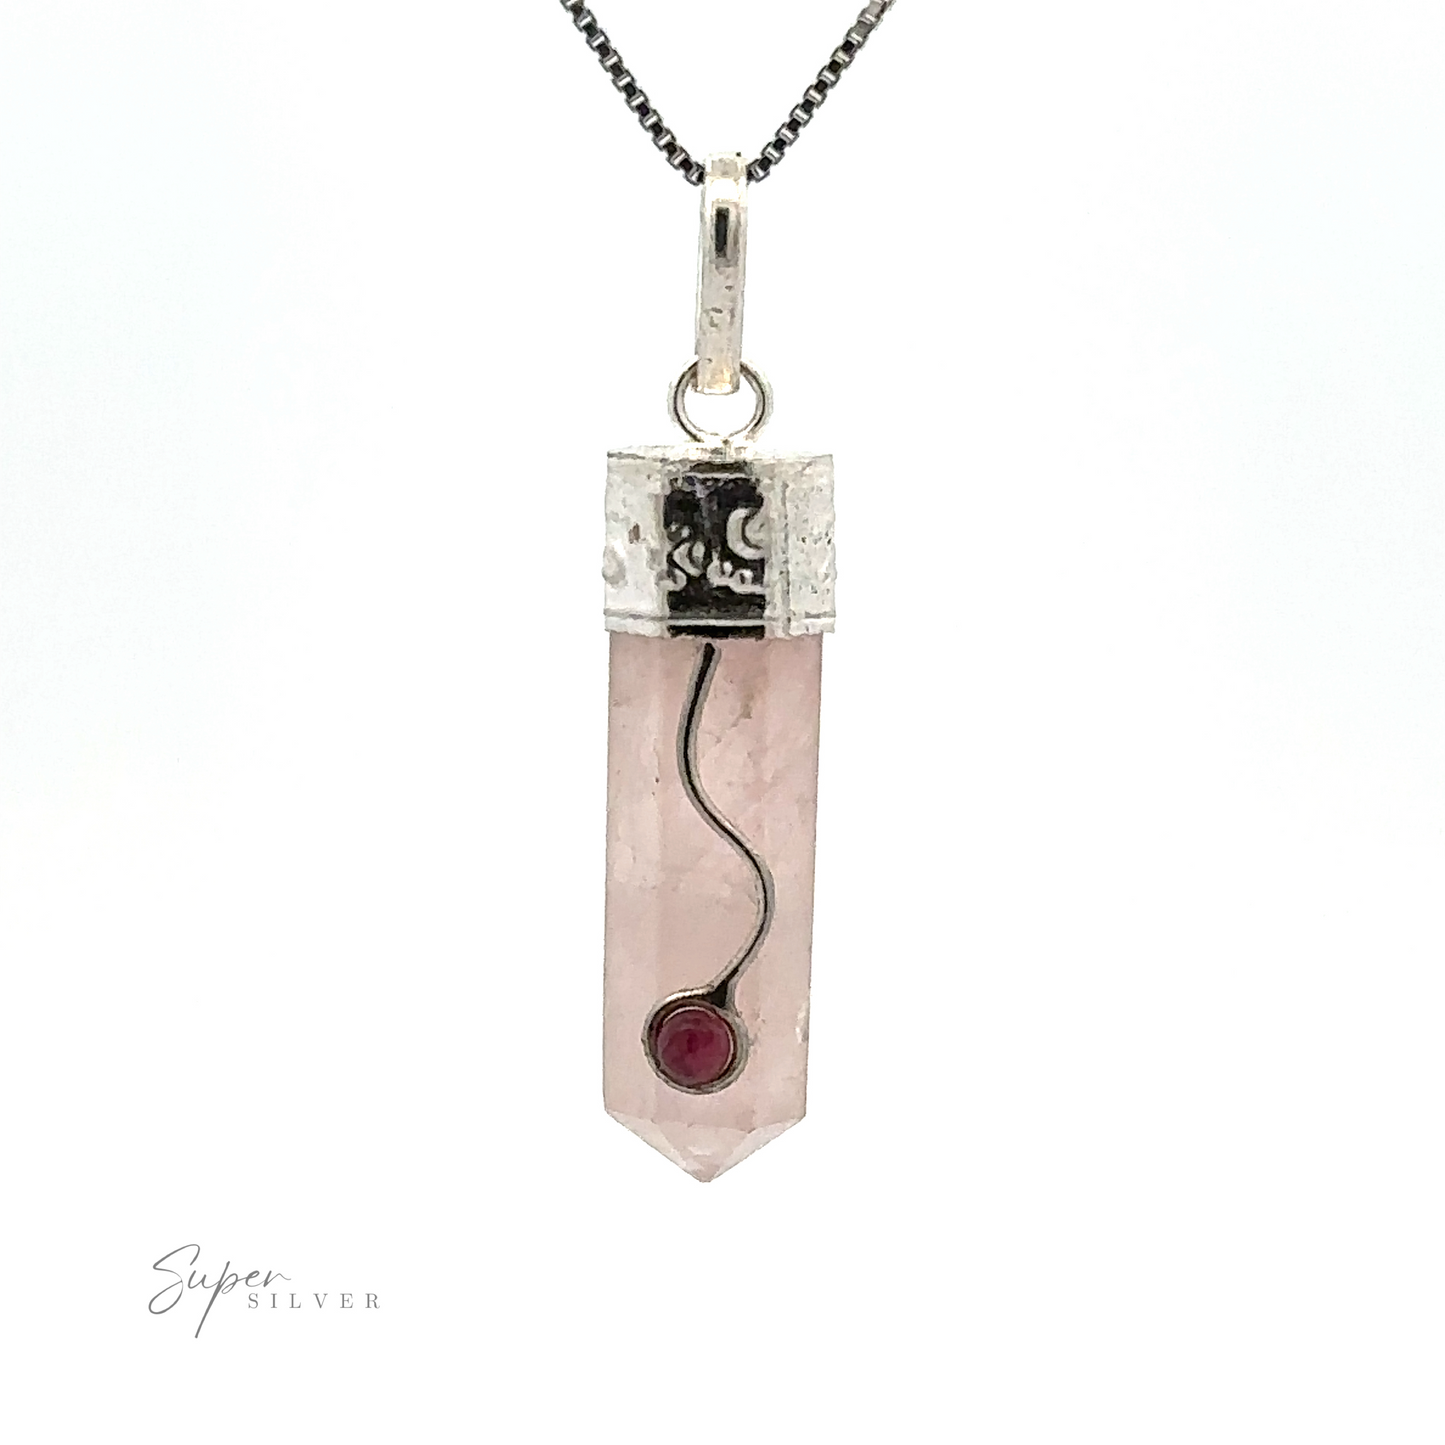 
                  
                    A Crystal Pendant with Decorative Bail, featuring a silver cap with intricate design, and a small embedded red gemstone. The pendant hangs from a thin, dark chain.
                  
                